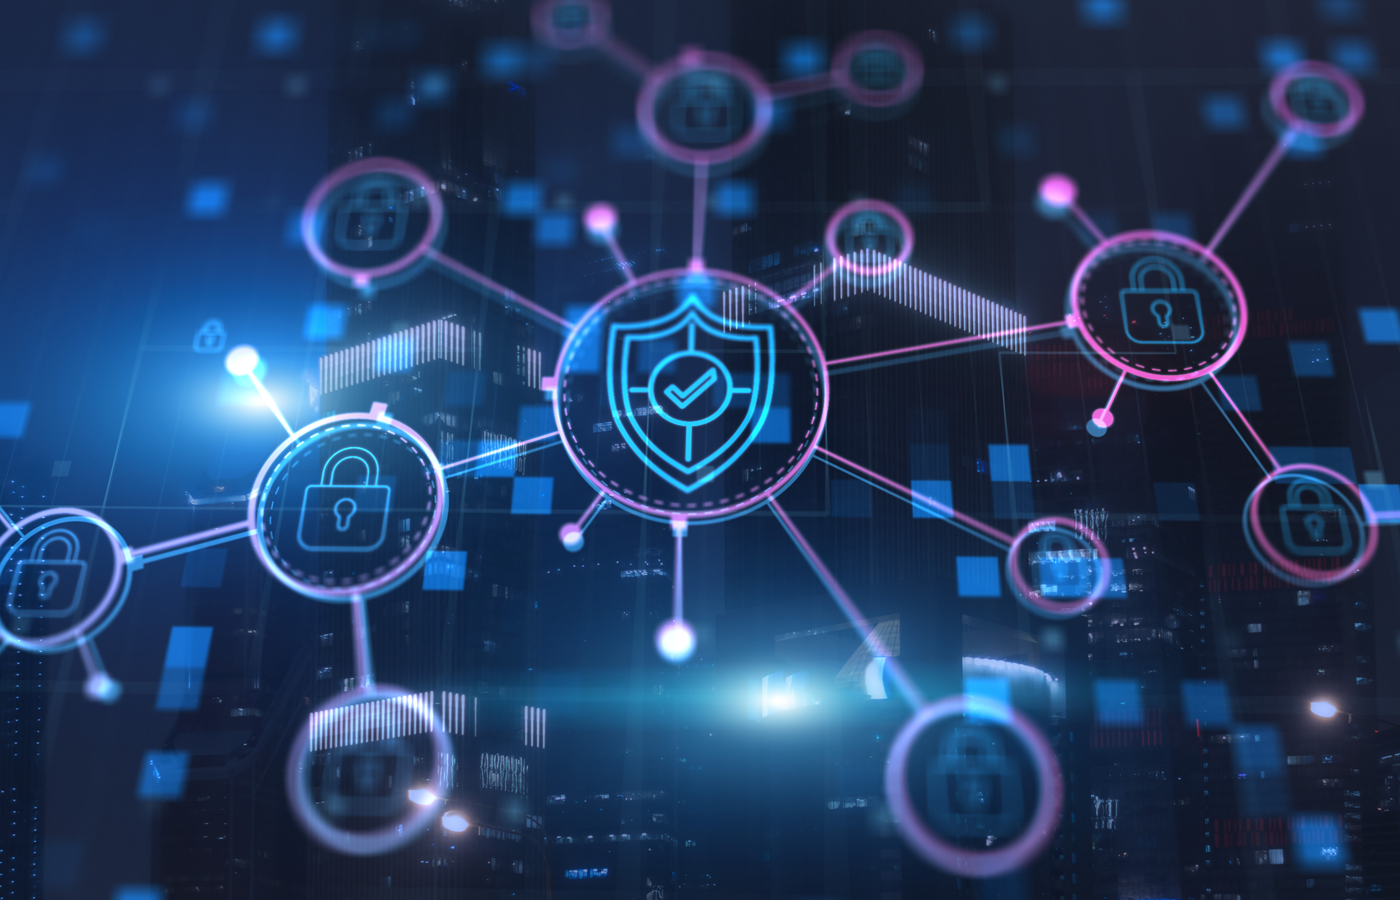 Cybersecurity data protection icons on interconnected nodes on a digital background.